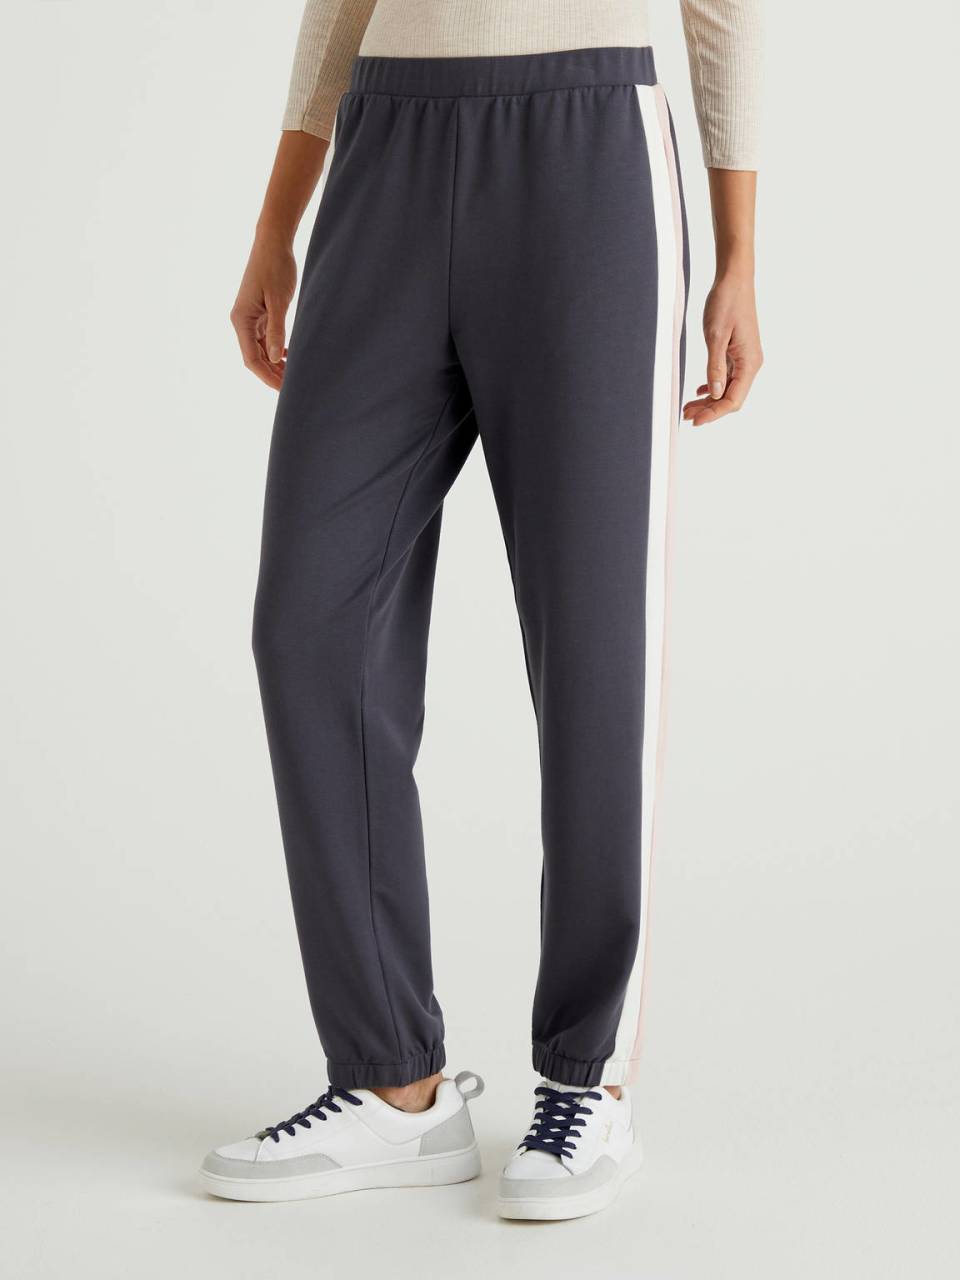 Benetton Sweatpants with clashing bands. 1